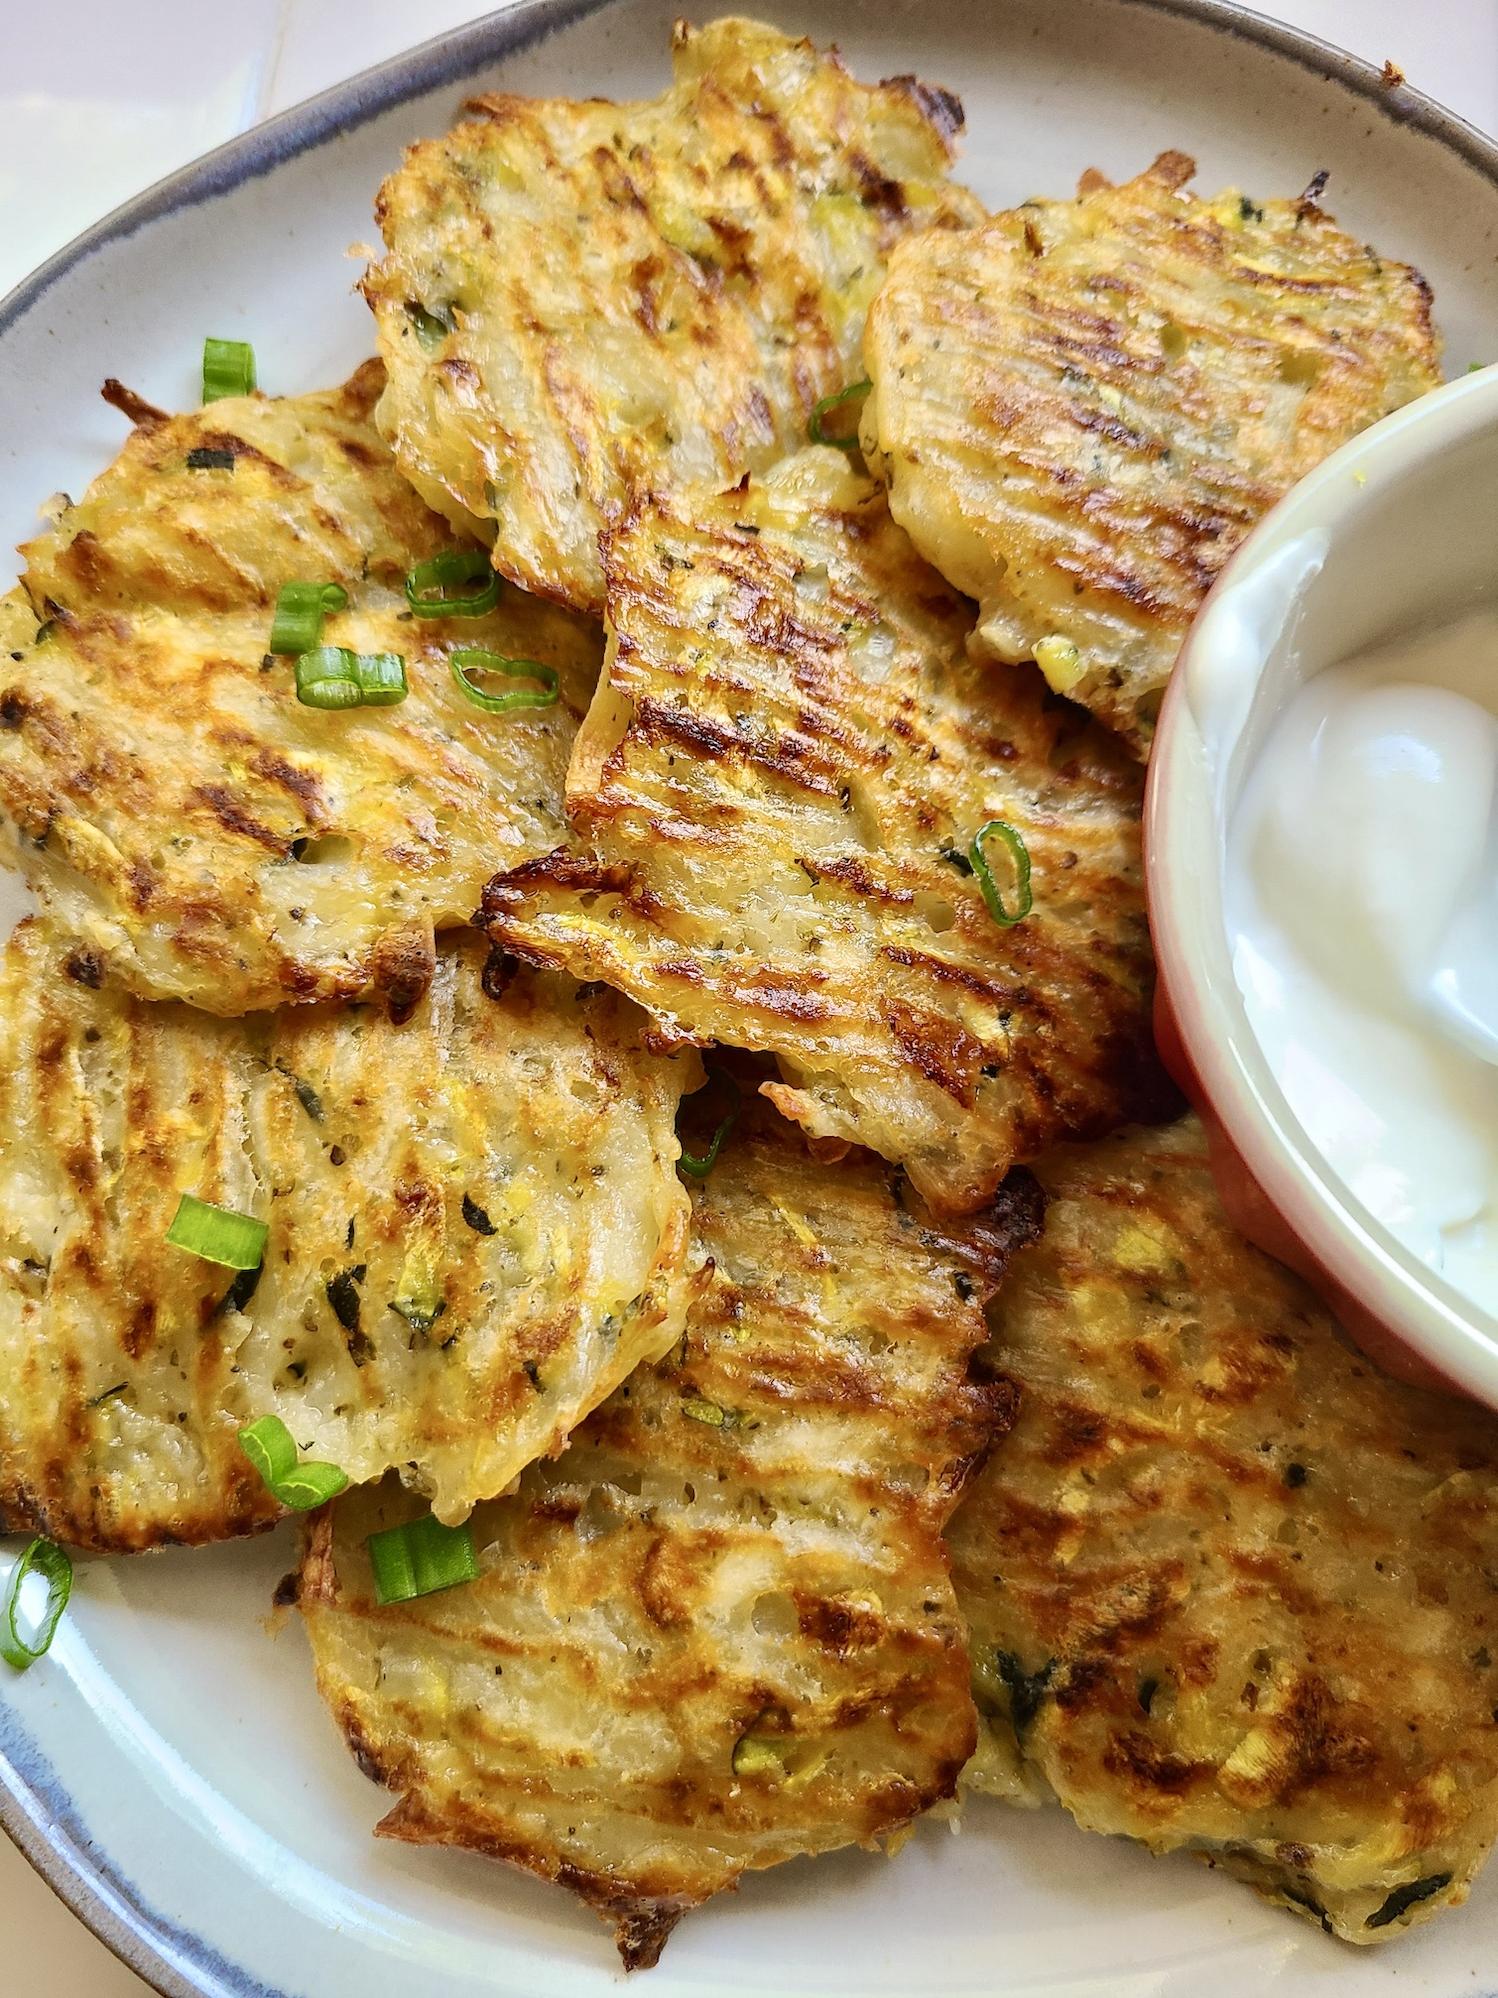  Potato and zucchini combine to make a perfect latke that will melt in your mouth.